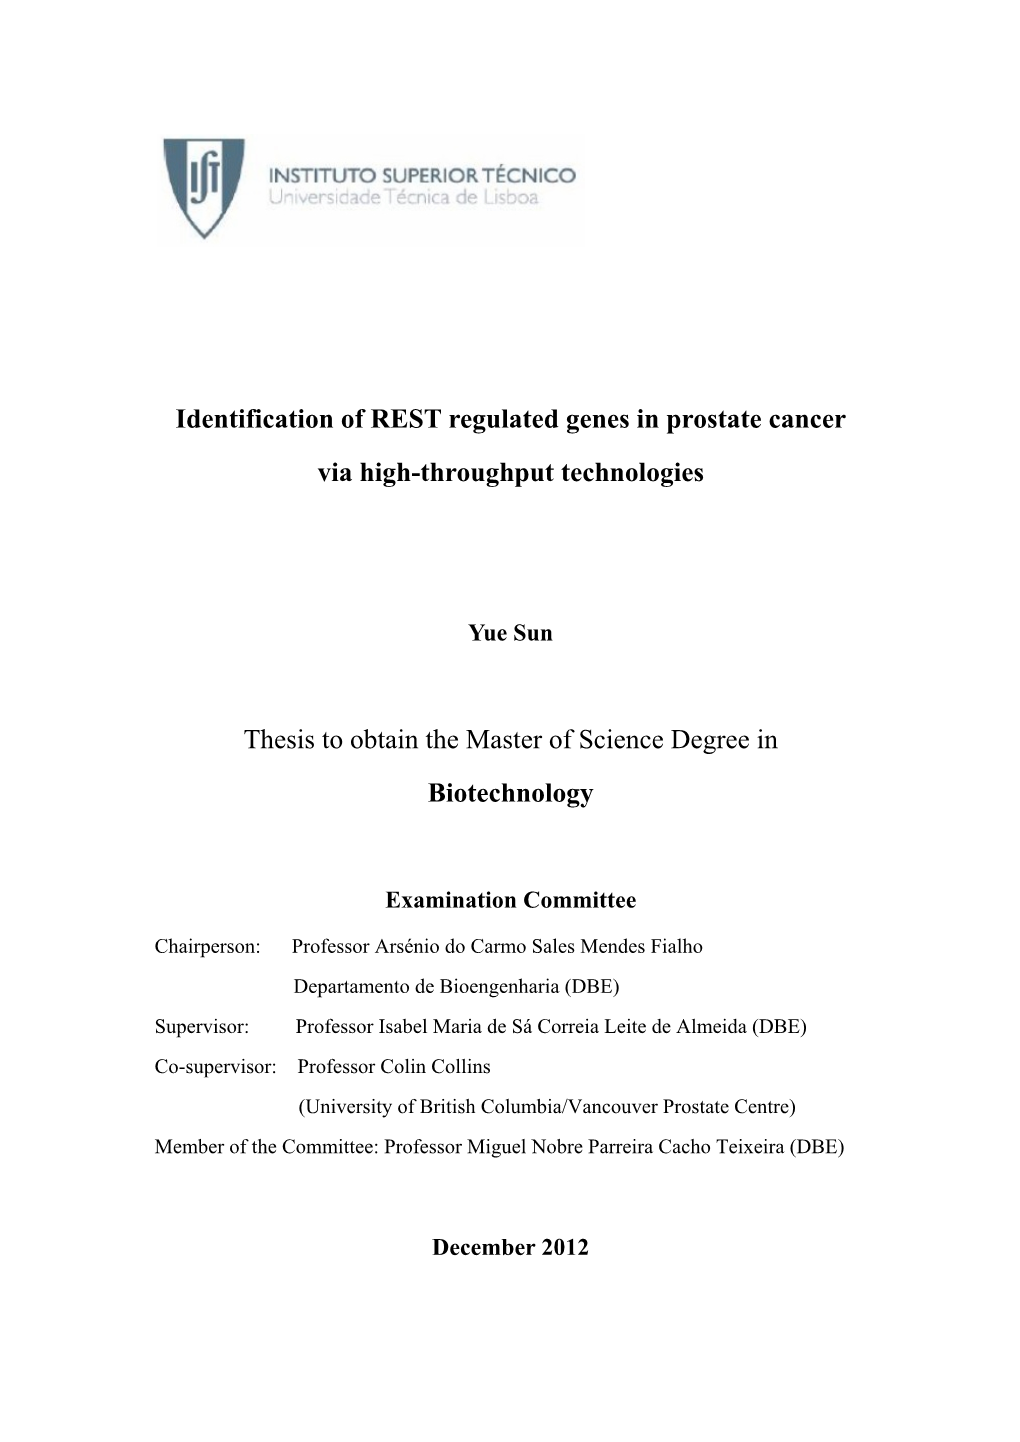 Identification of REST Regulated Genes in Prostate Cancer Via High-Throughput Technologies